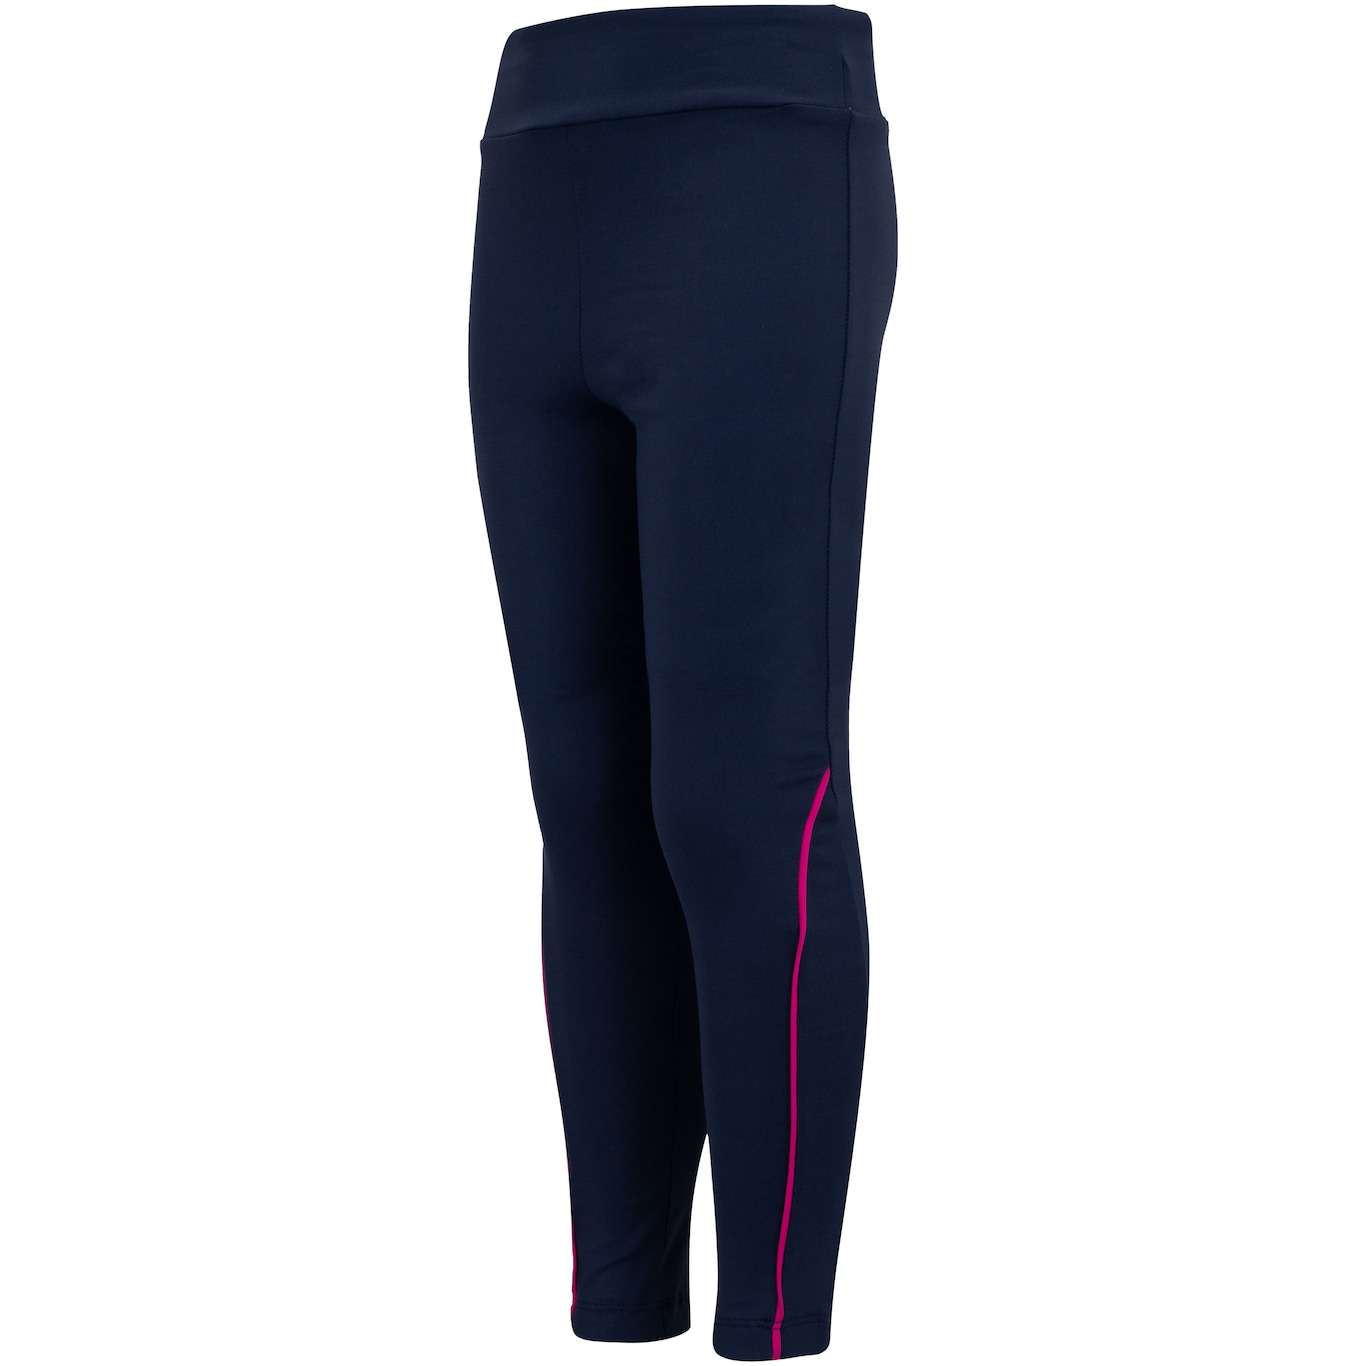 Women's Trackster Classic Running Tights